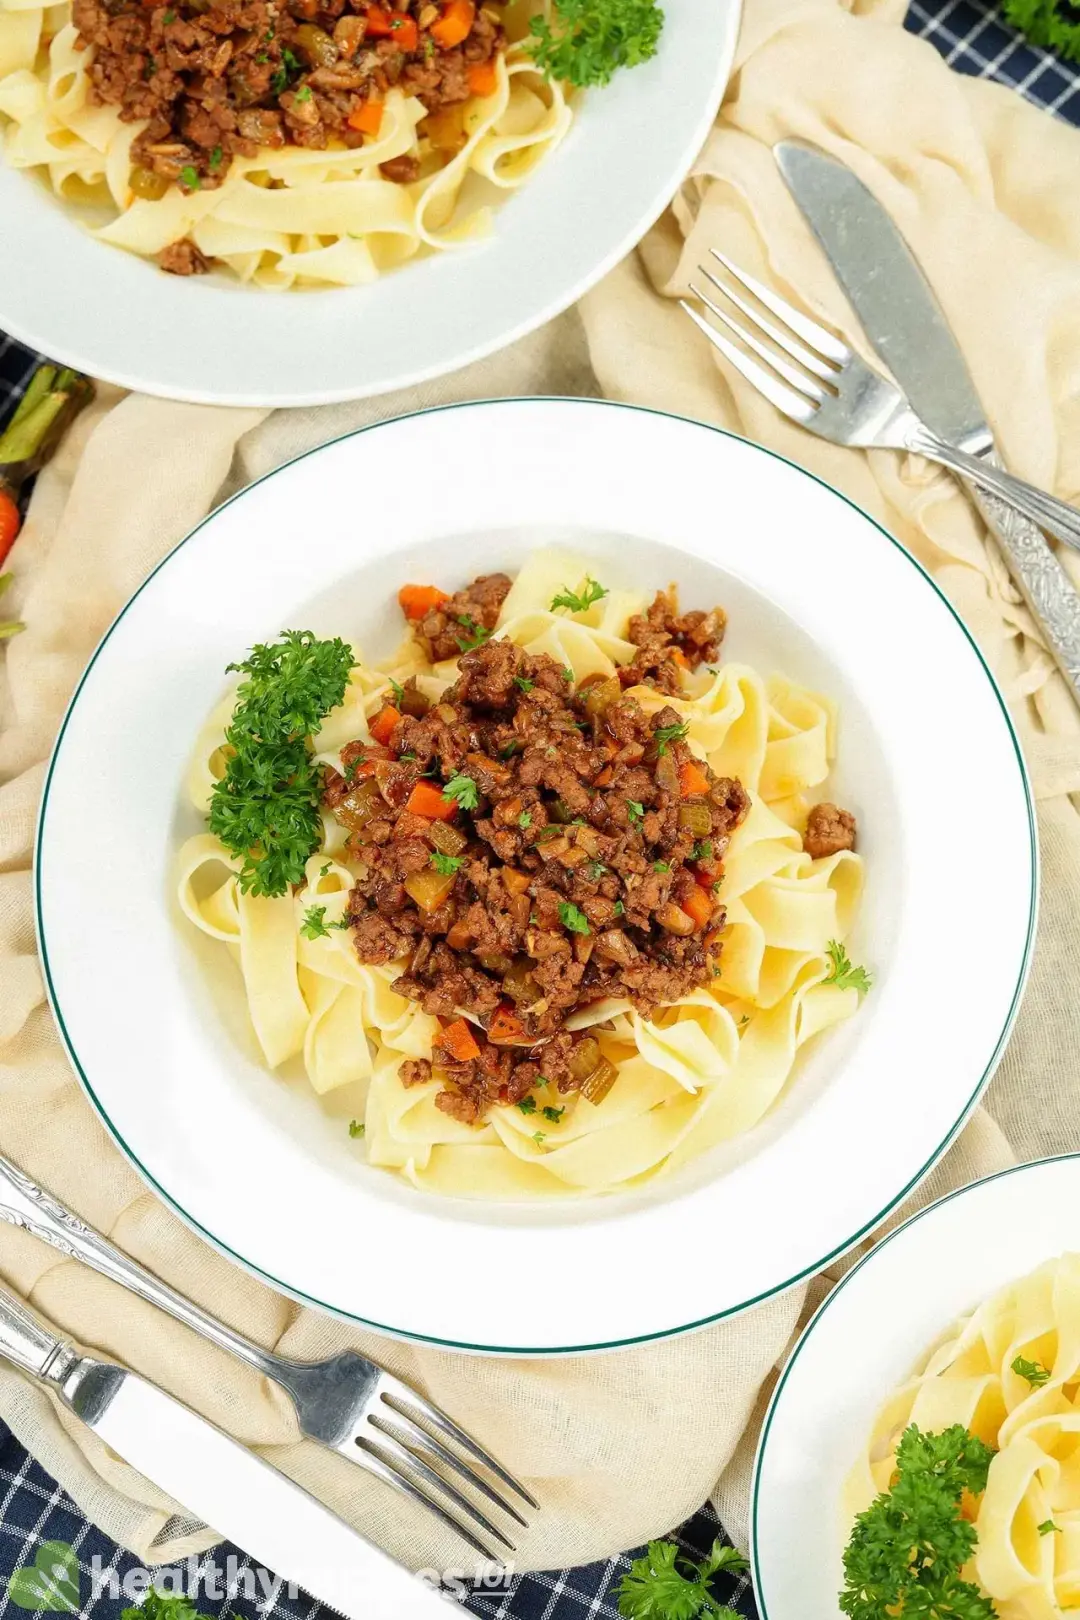 What to Serve With Vegetable Beef Ragu